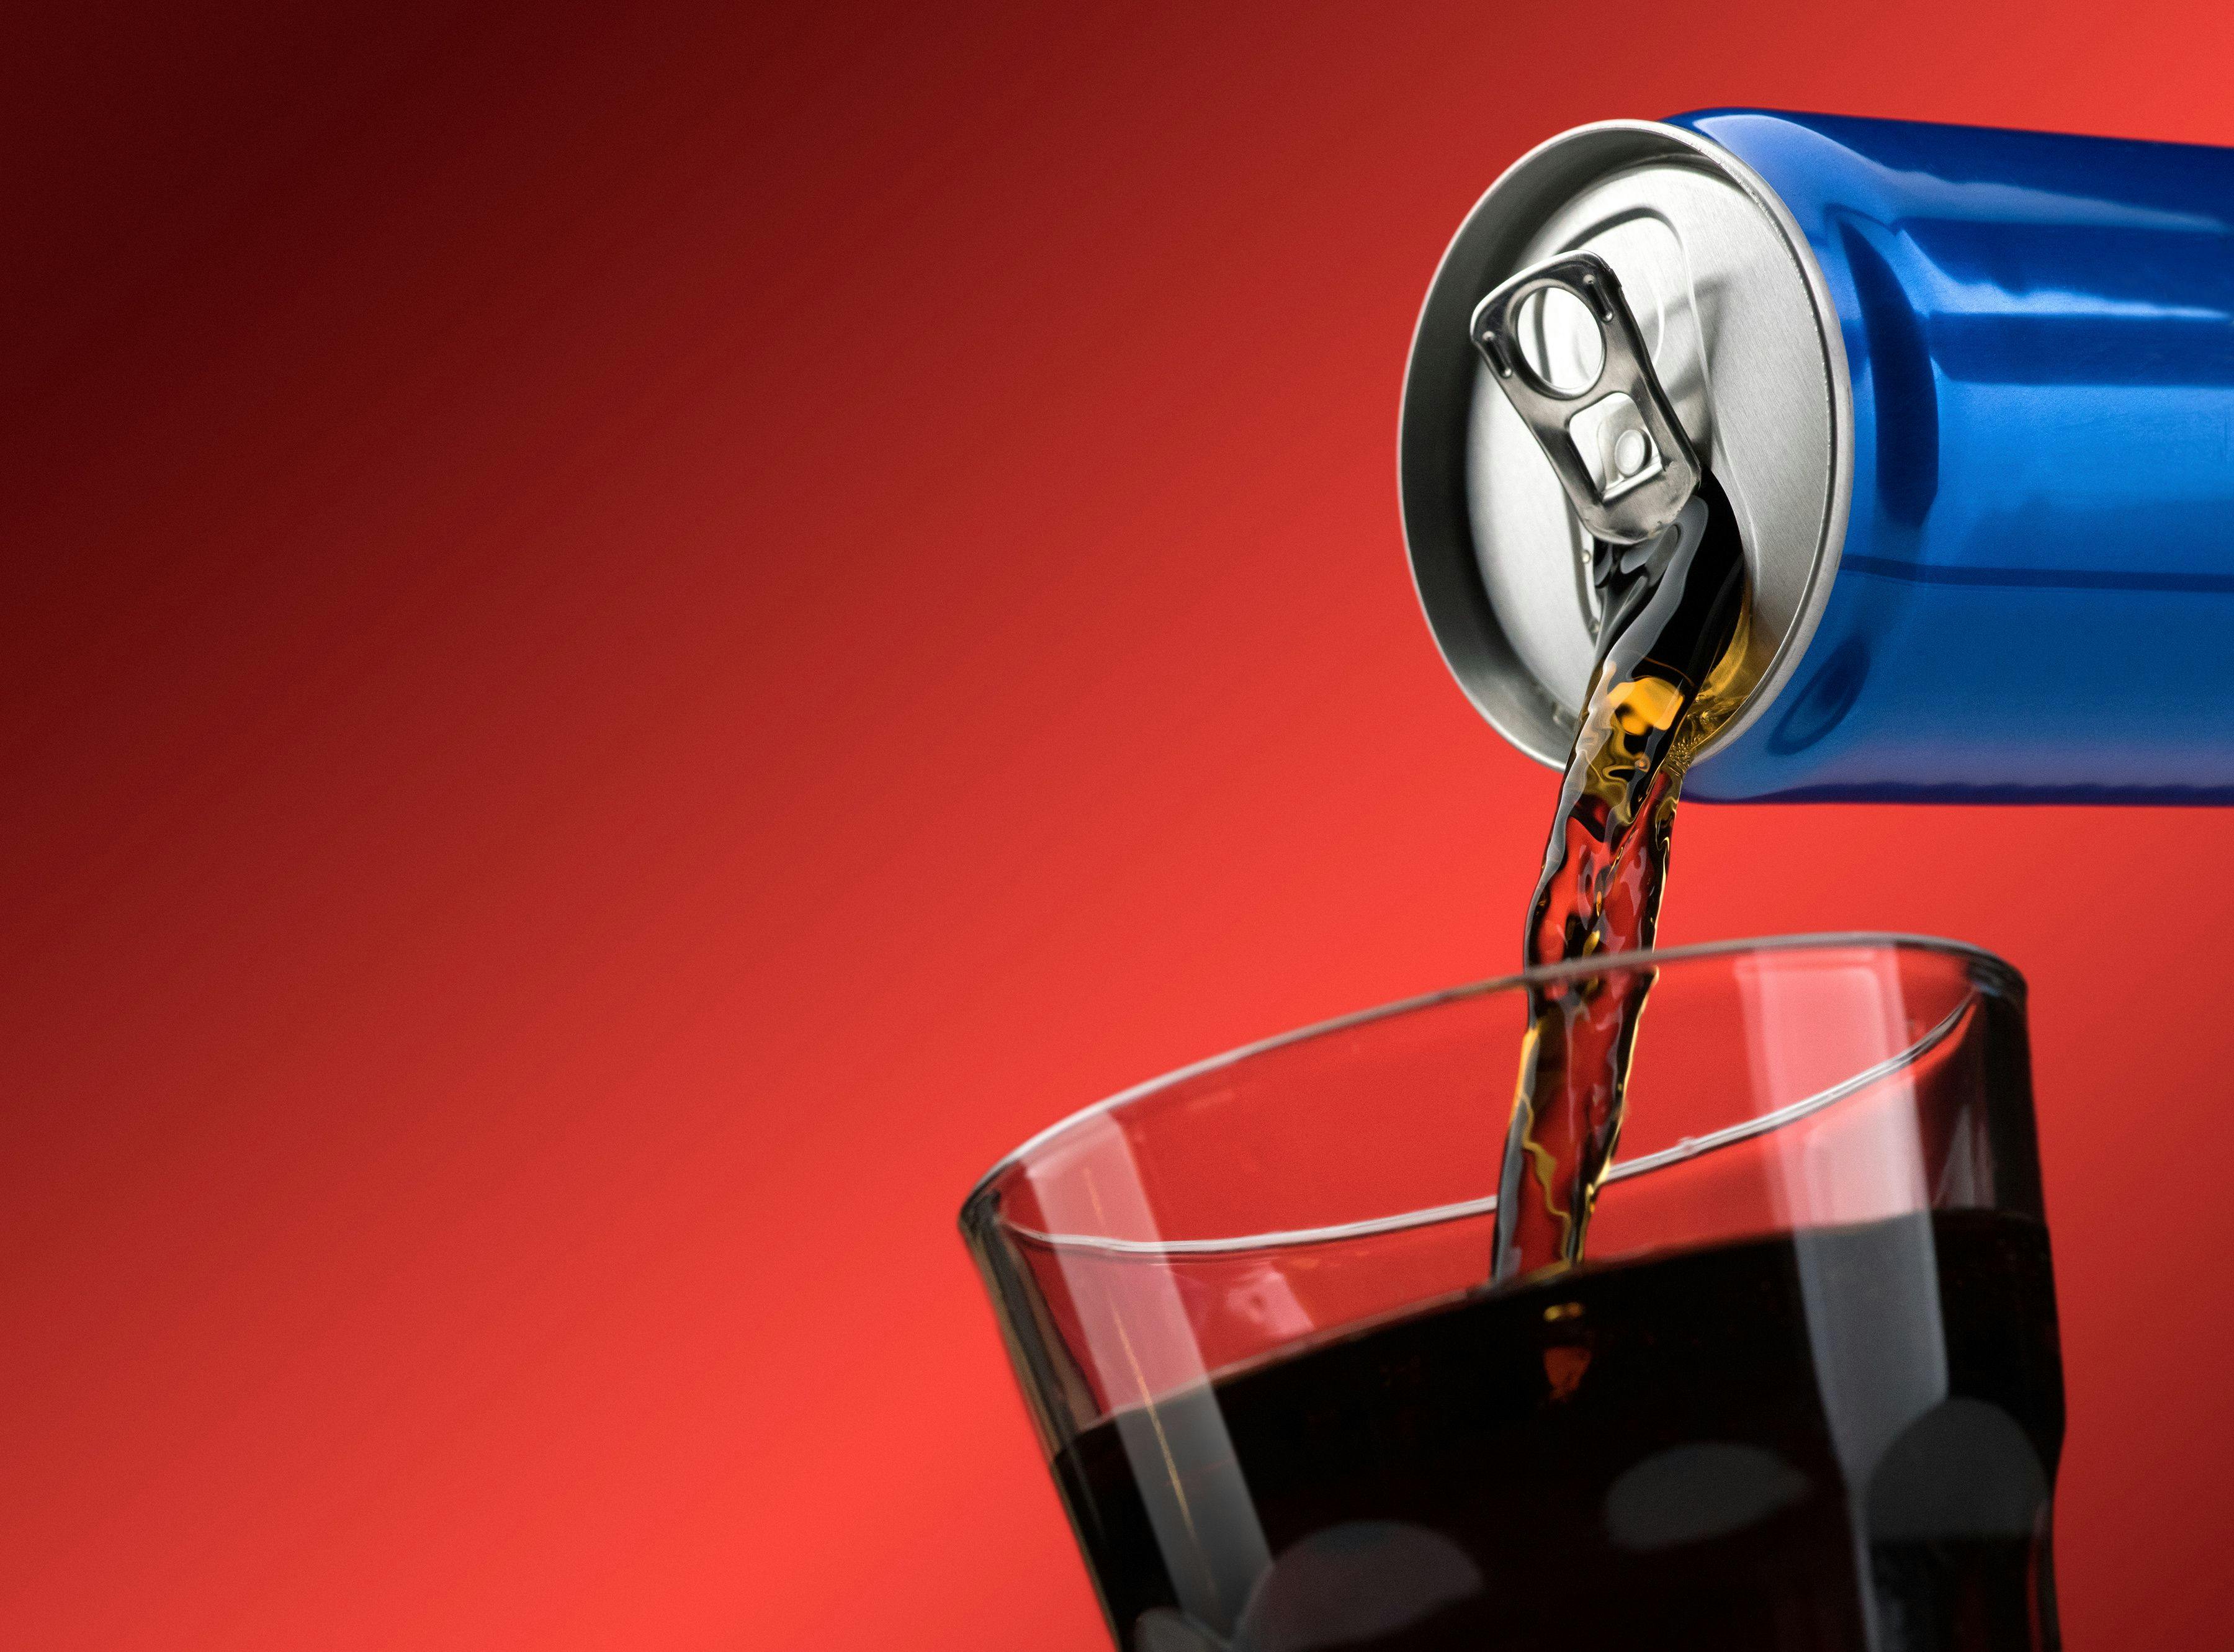 Sugary Drink Tax Models Offer Significant Health Gains, Health Care Cost Reductions